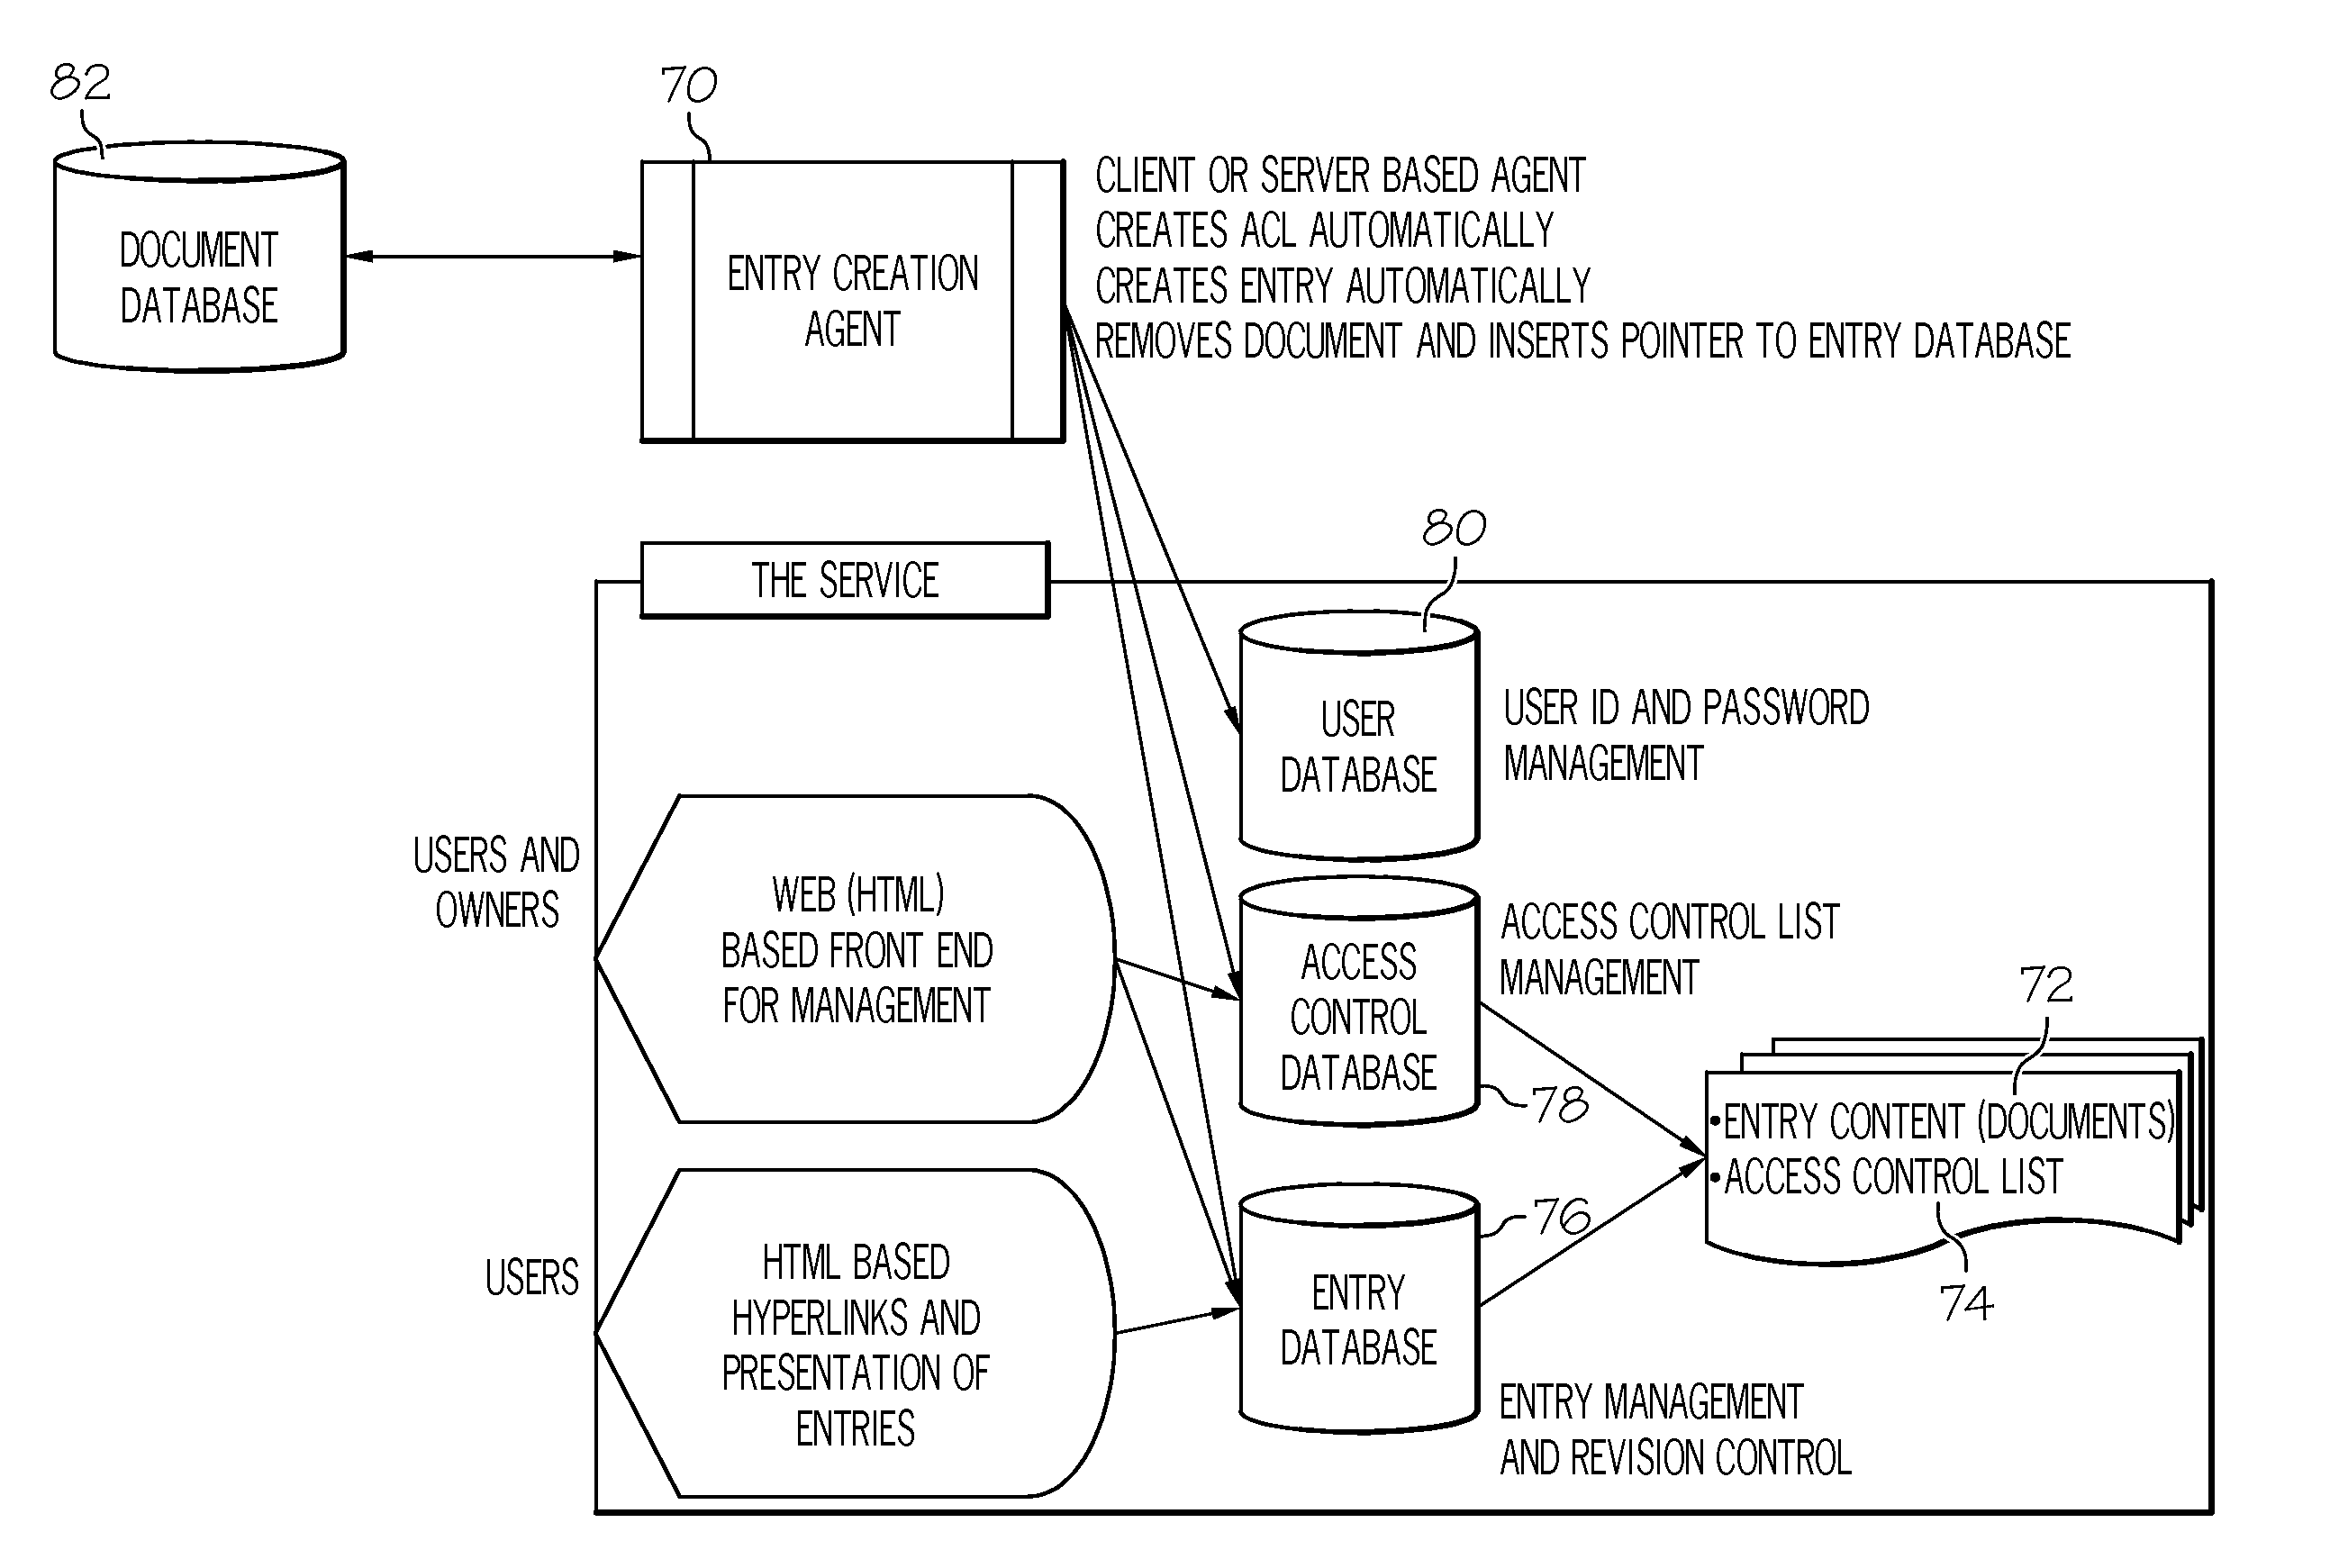 Dynamic access control for documents in electronic communications within a cloud computing environment